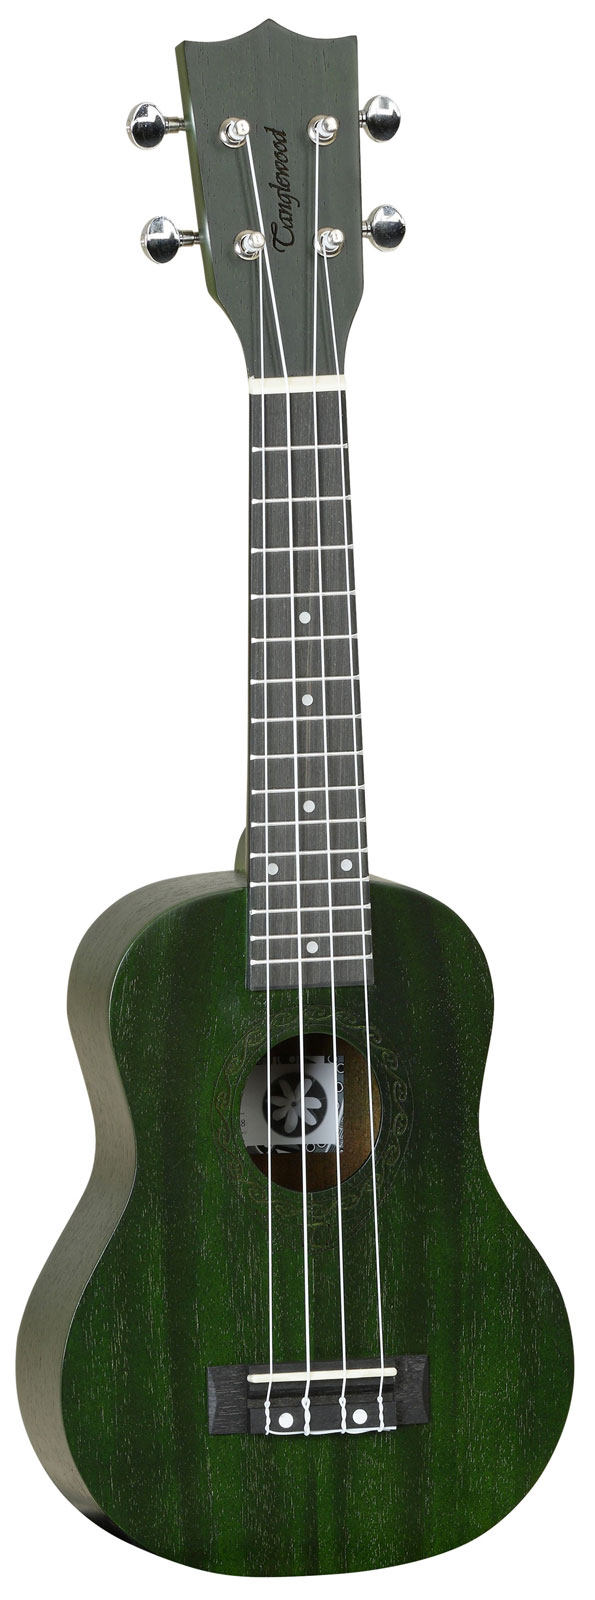 TANGLEWOOD TIARE CLASSICAL TWT 1 FG SOPRANO FOREST GREEN SATIN